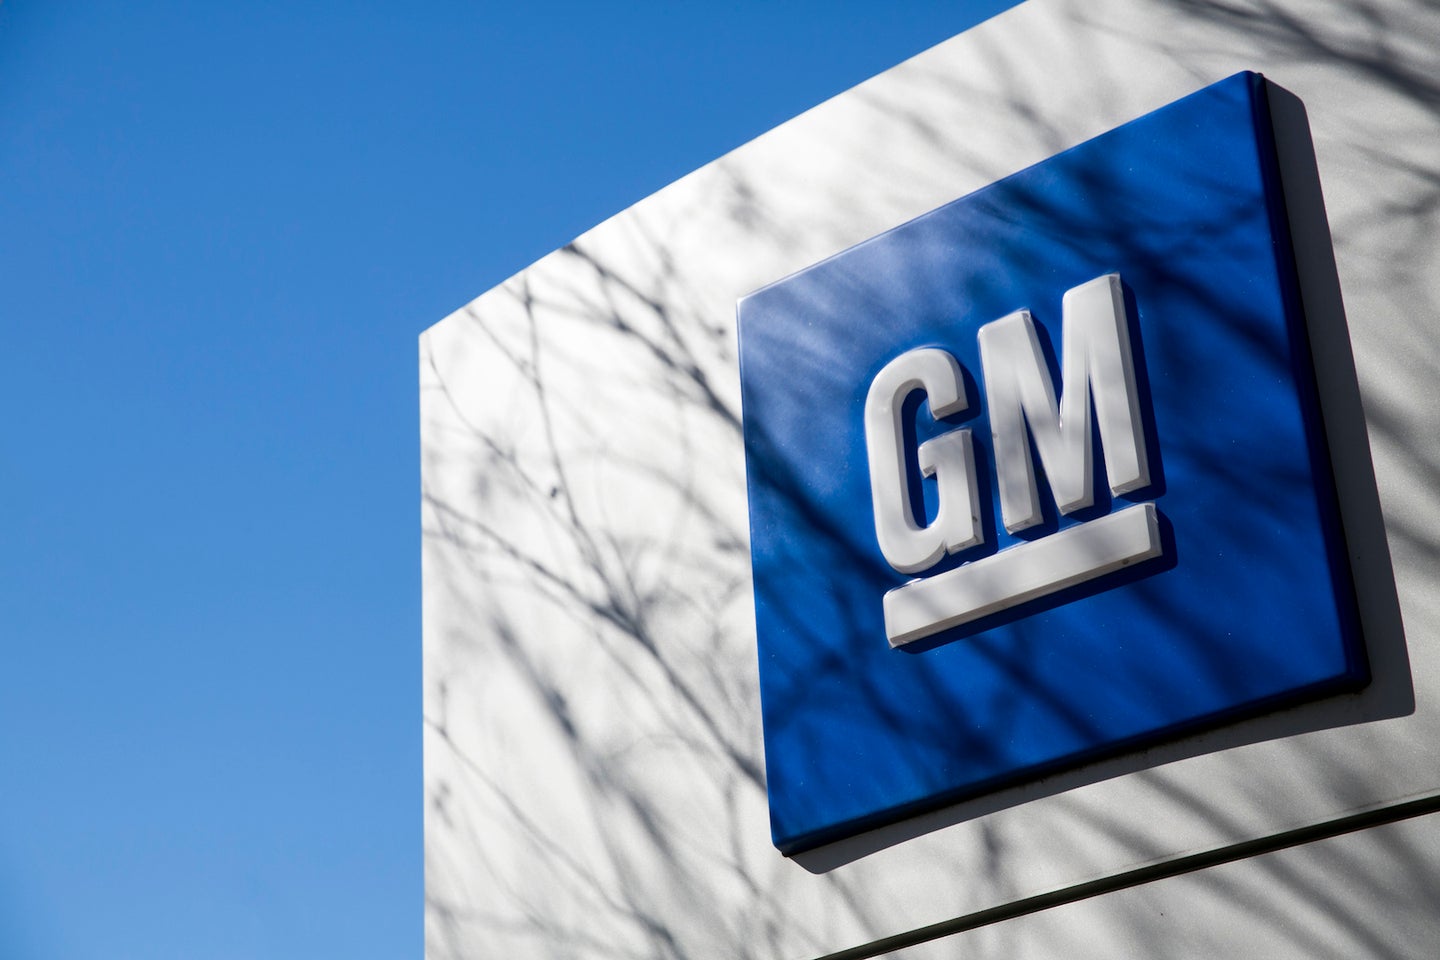 Former Employees Sue GM After Nooses and ‘Whites-Only’ Bathroom Signs Surfaced at Ohio Plant